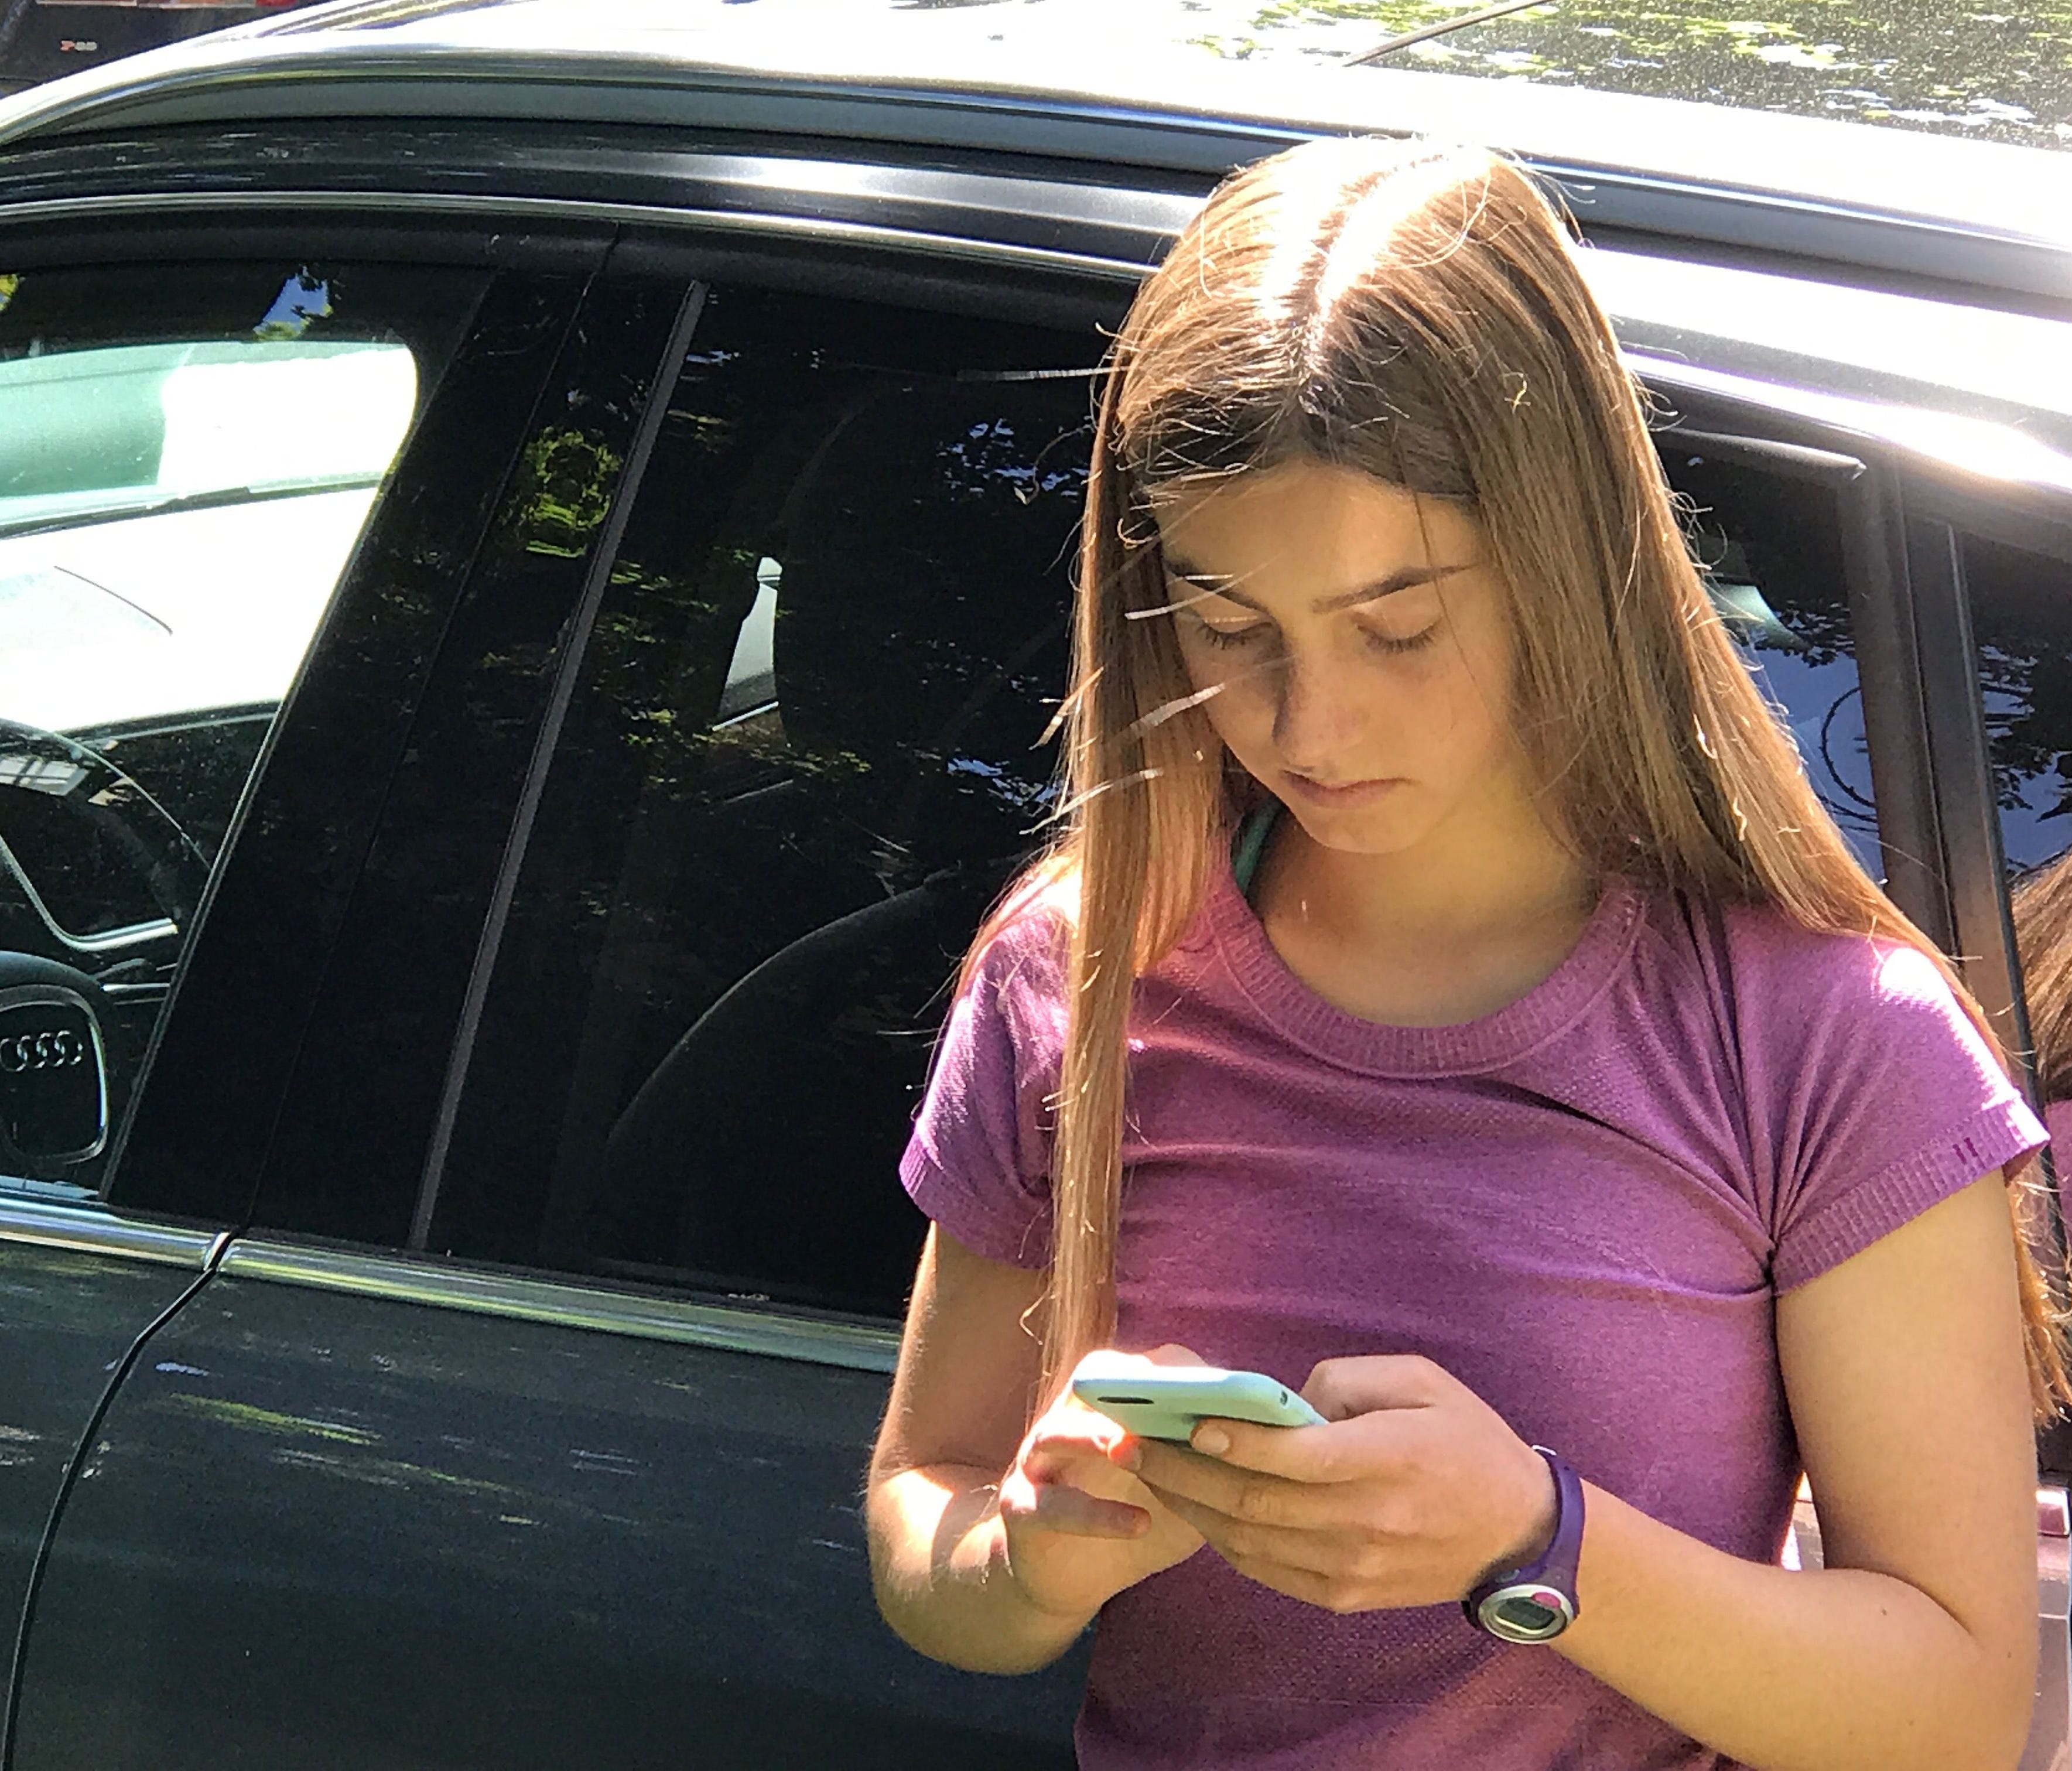 16-year-old Jeneva Toolajian, daughter of columnist Jennifer Jolly, texts on her iPhone in Oakland. CA.